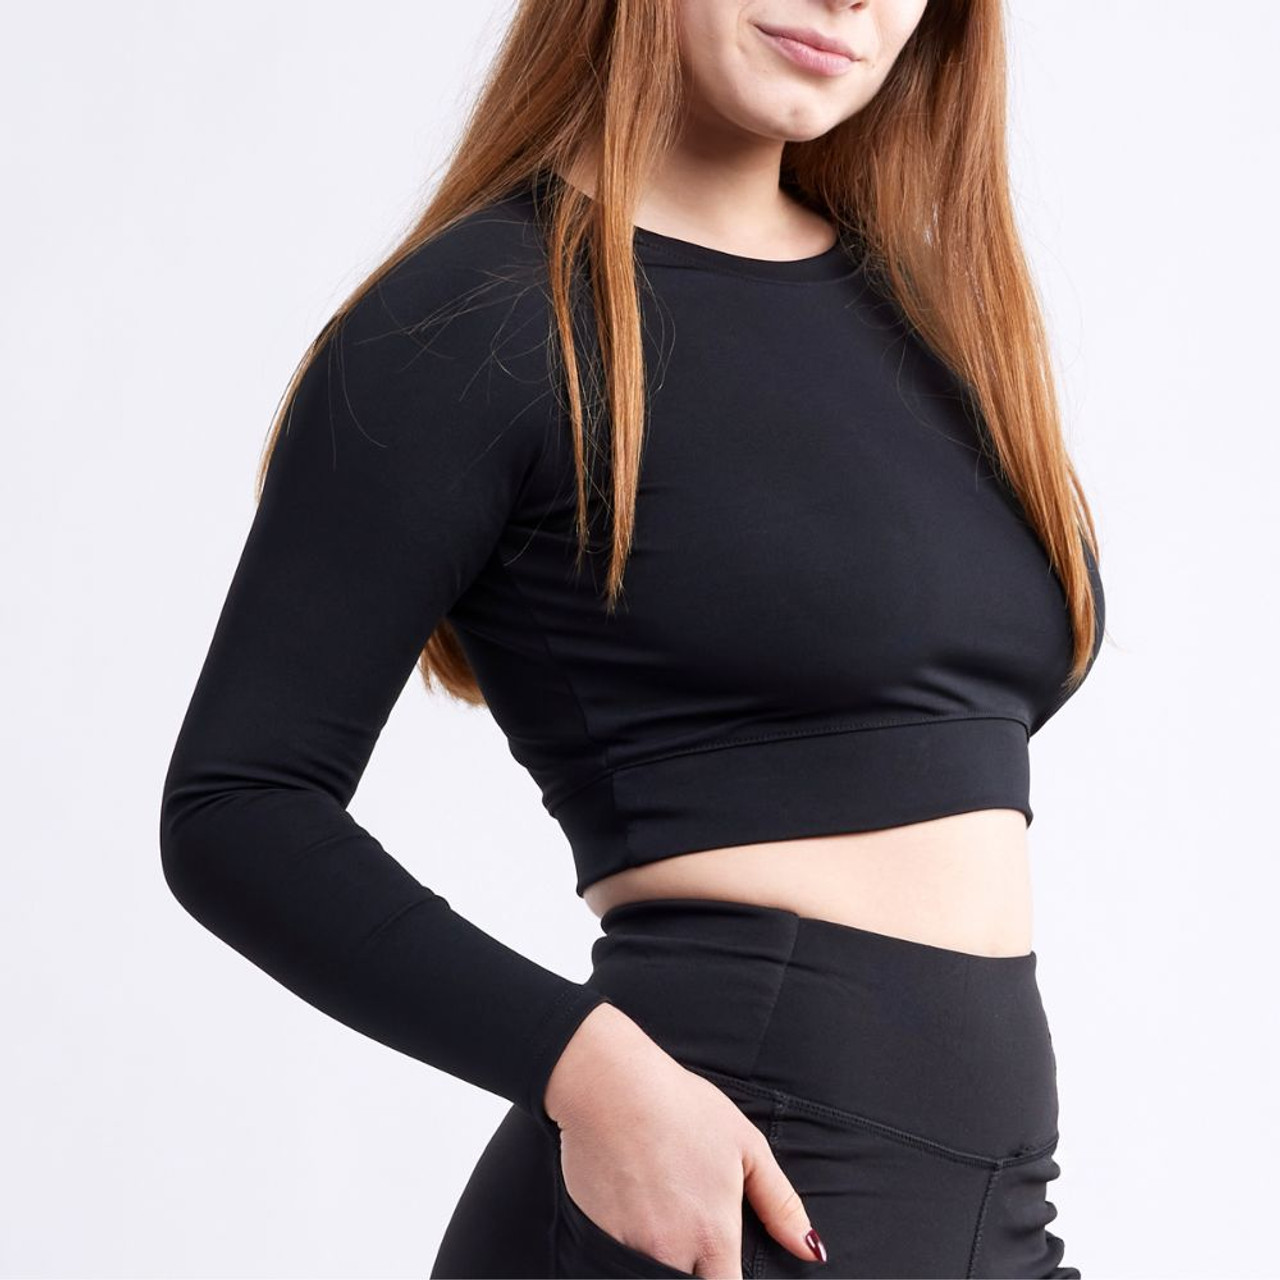 Women's Long Sleeve Round Neck Crop Top product image